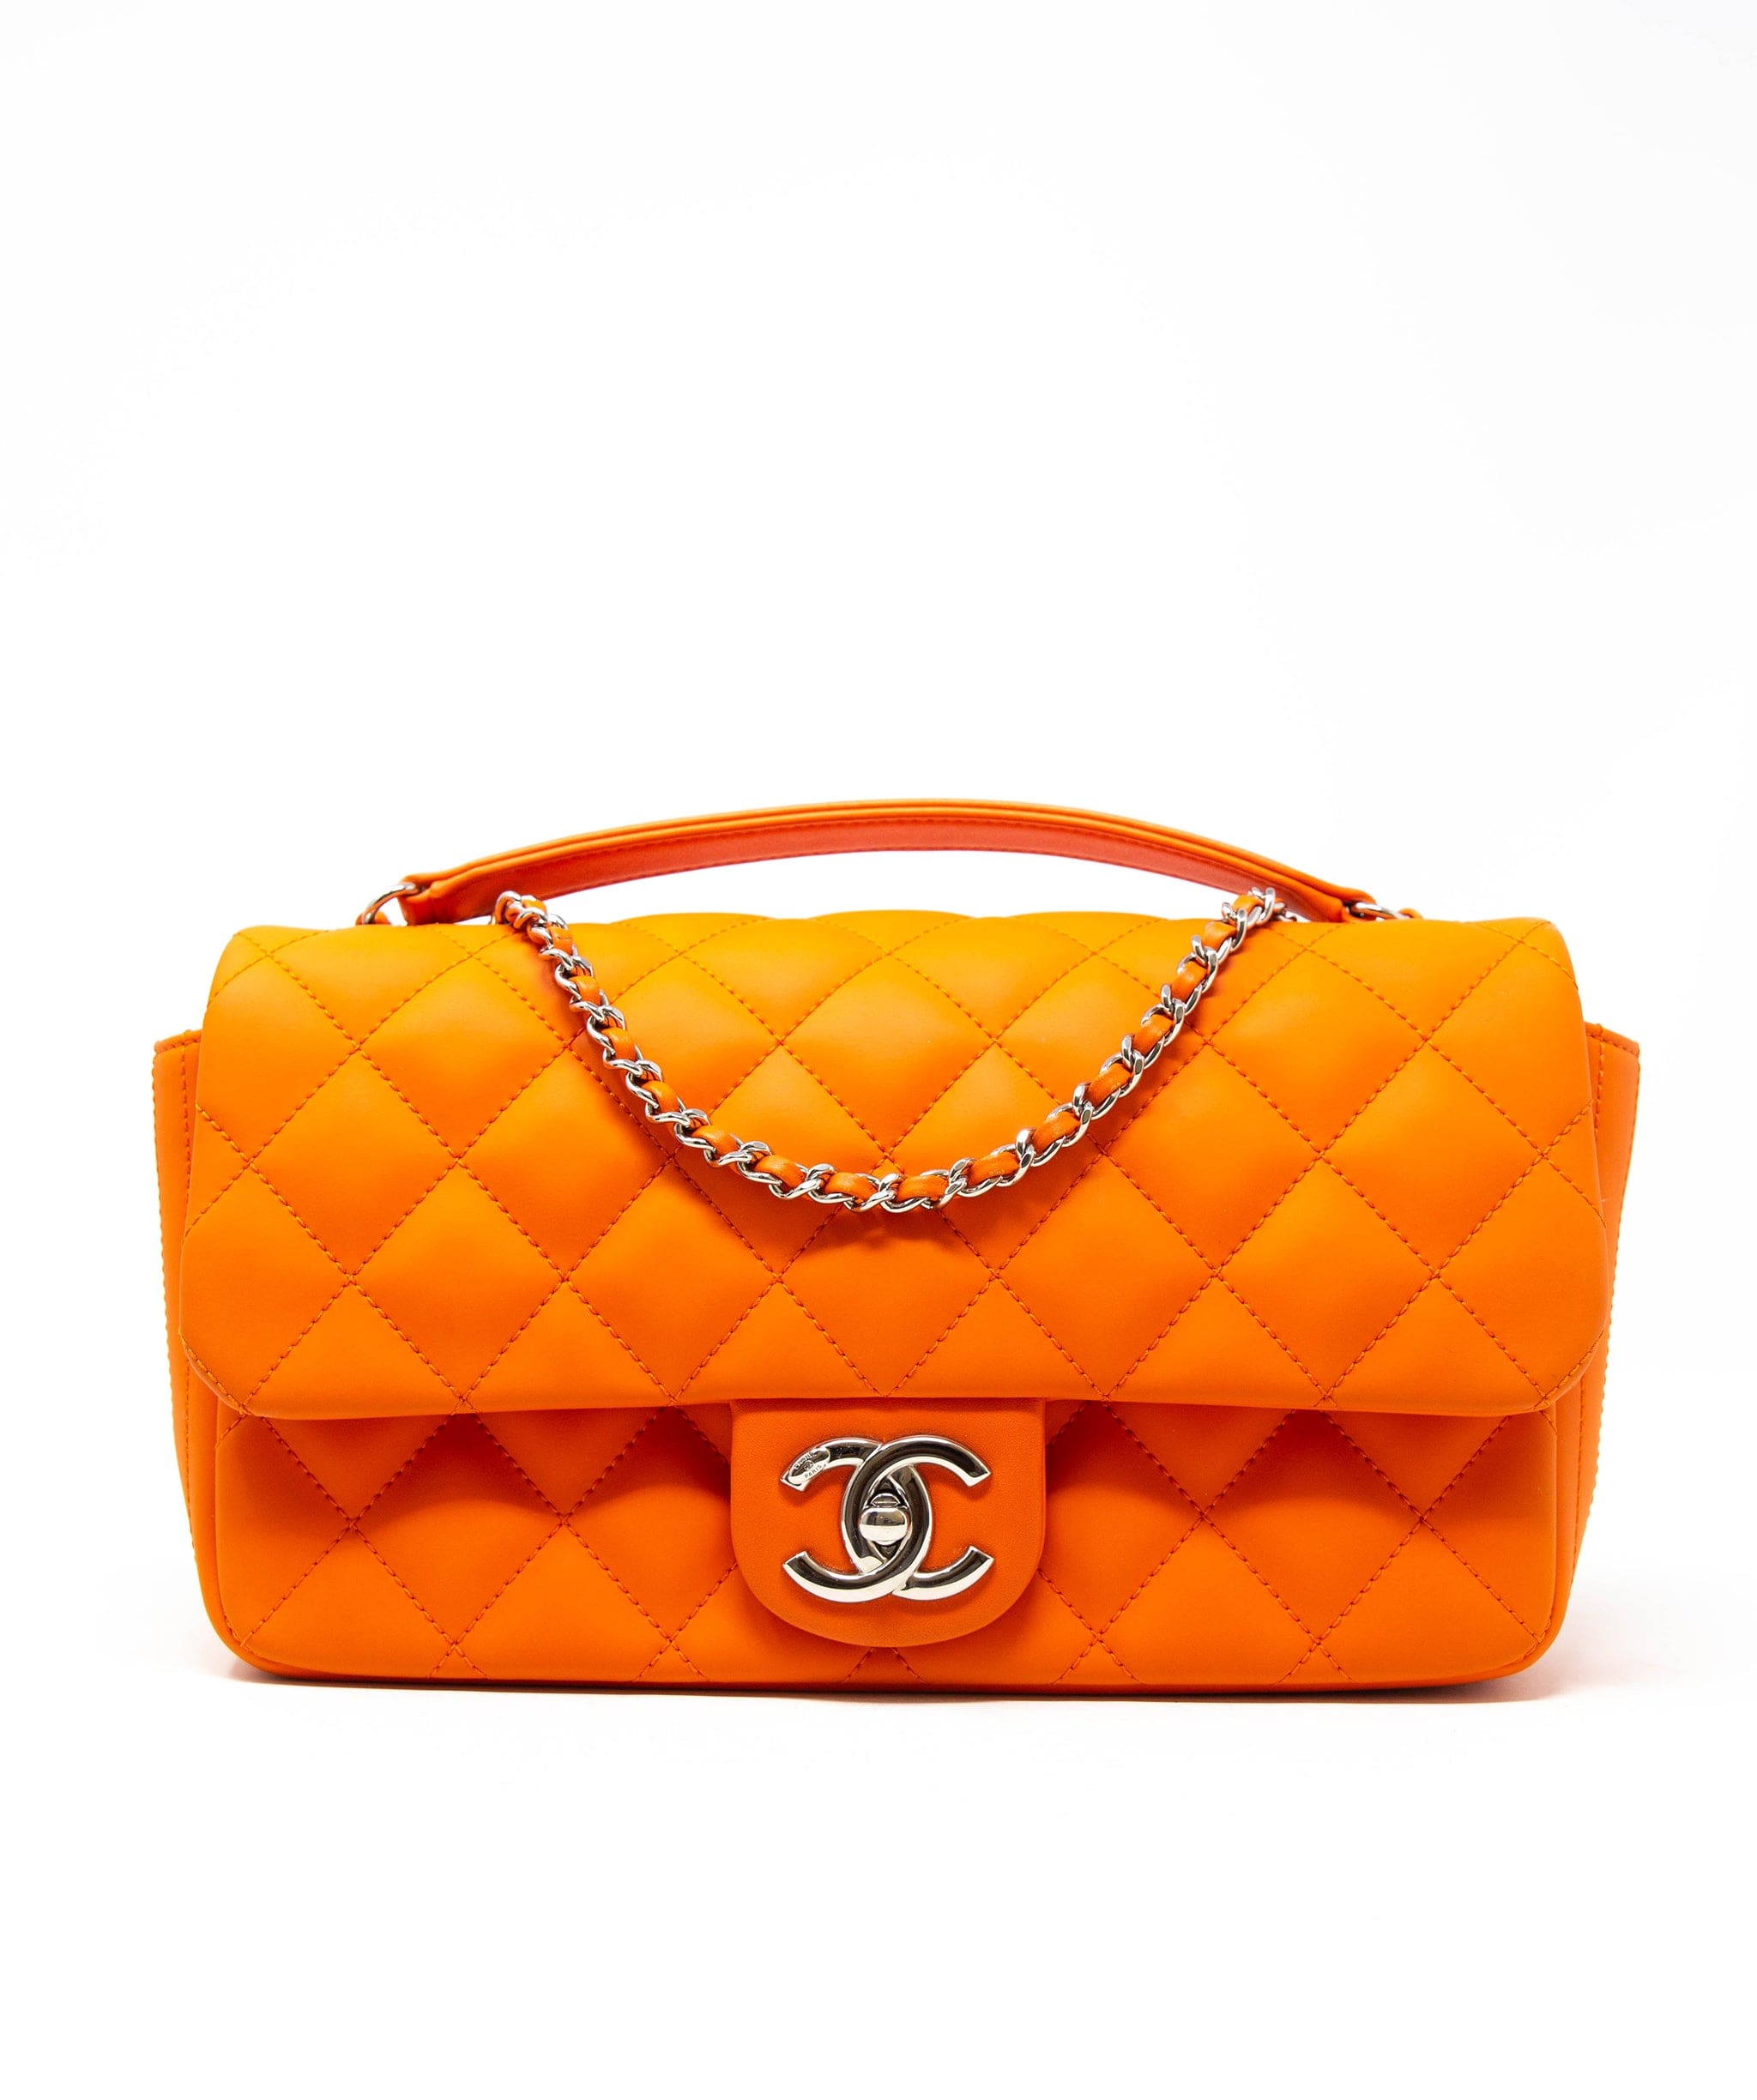 Timeless/classique leather handbag Chanel Orange in Leather - 18155705